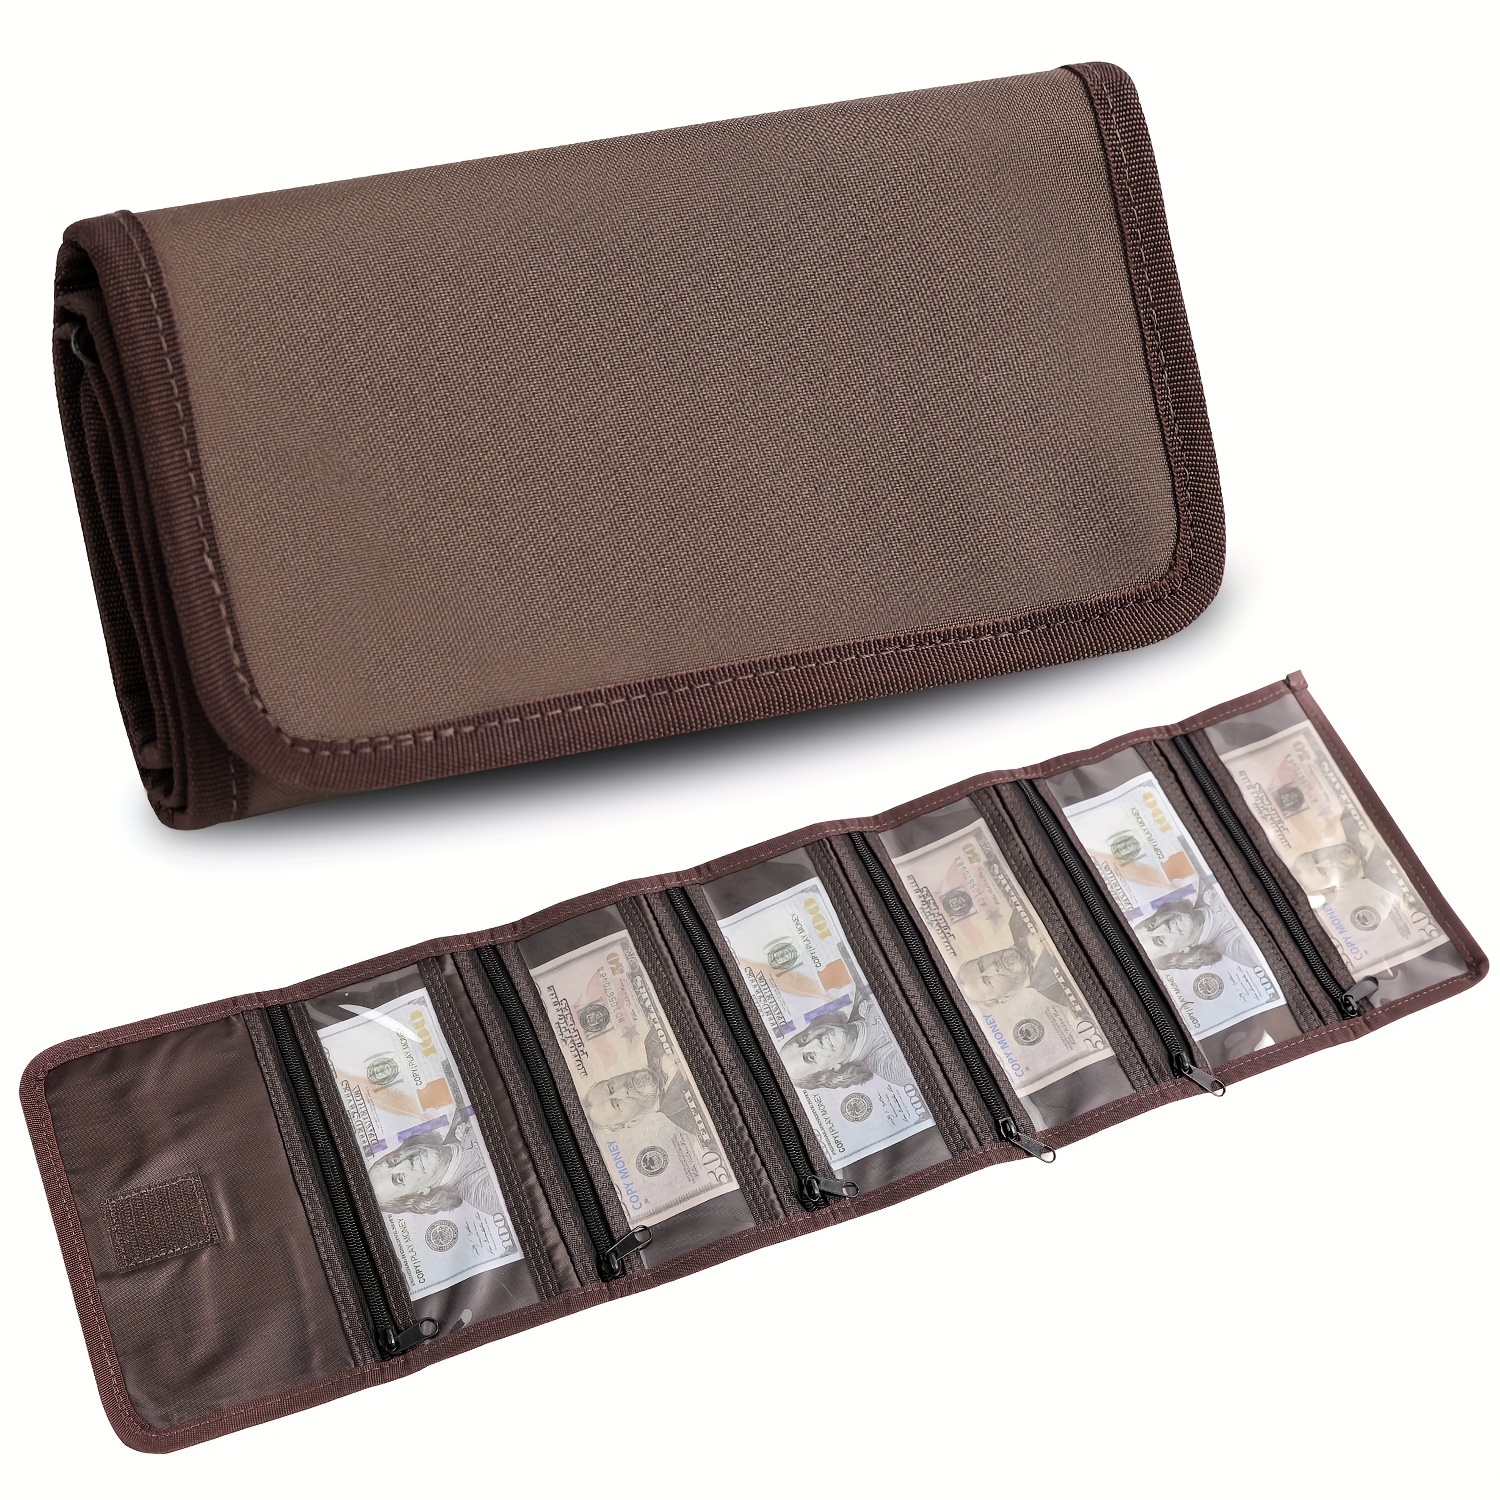 Money Wallet Money Organizer For Cash With 6 Zippered Pocket Multipack Money  Pouch Cash Bill Organizer Envelope Wallet Money Bag Small Travel Money  Holder For Budgeting Receipt And Tips